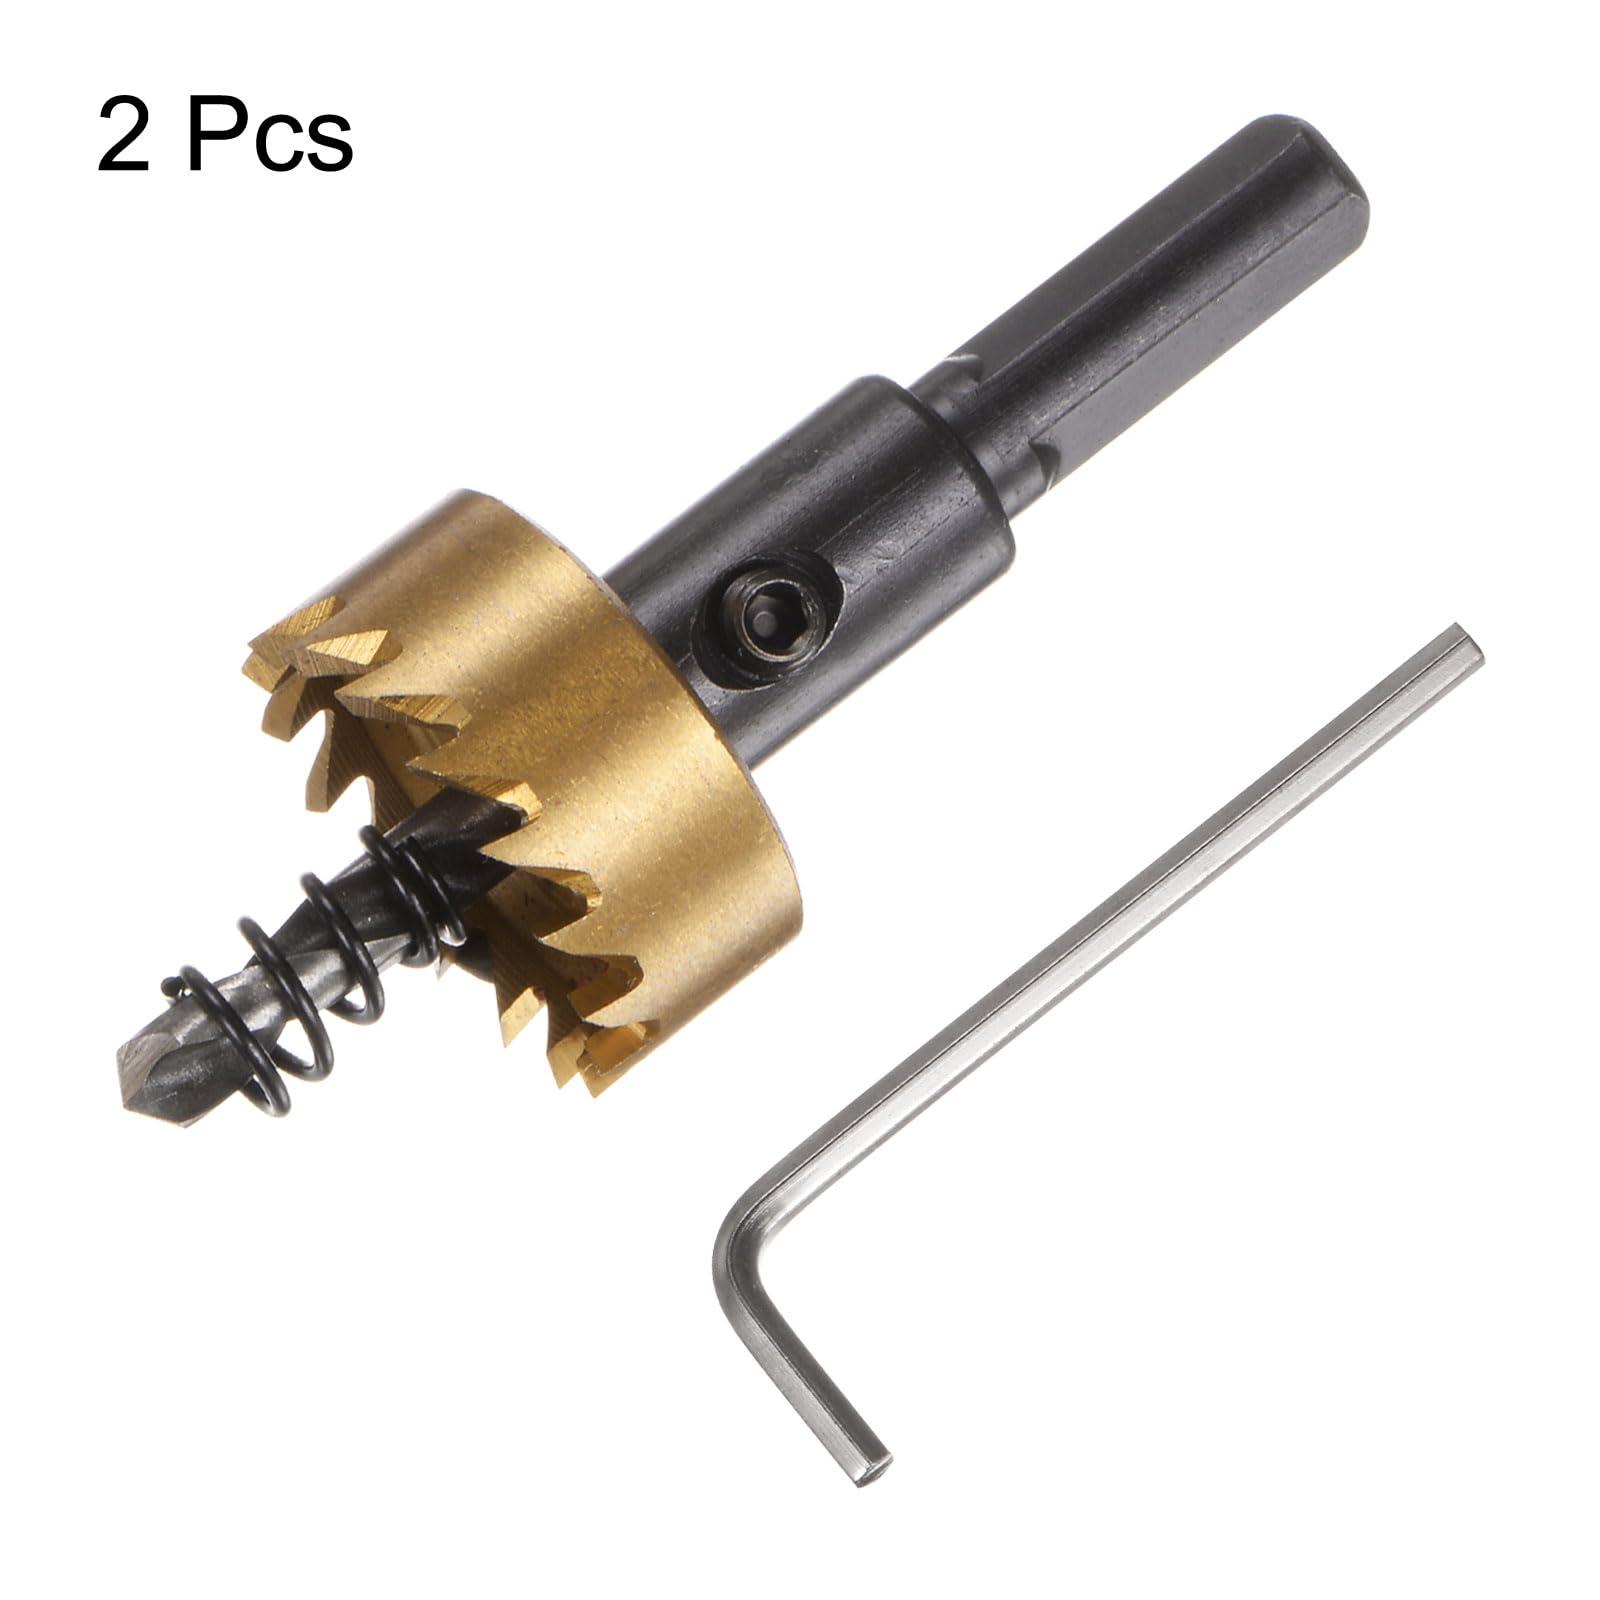 sourcing map 2pcs Hole Saws 26mm (1-2/85") M35 HSS (High Speed Steel) Titanium Coated Drill Bits Cutters Openers for Stainless Steel Aluminum Alloy Metal Wood Plastic 2